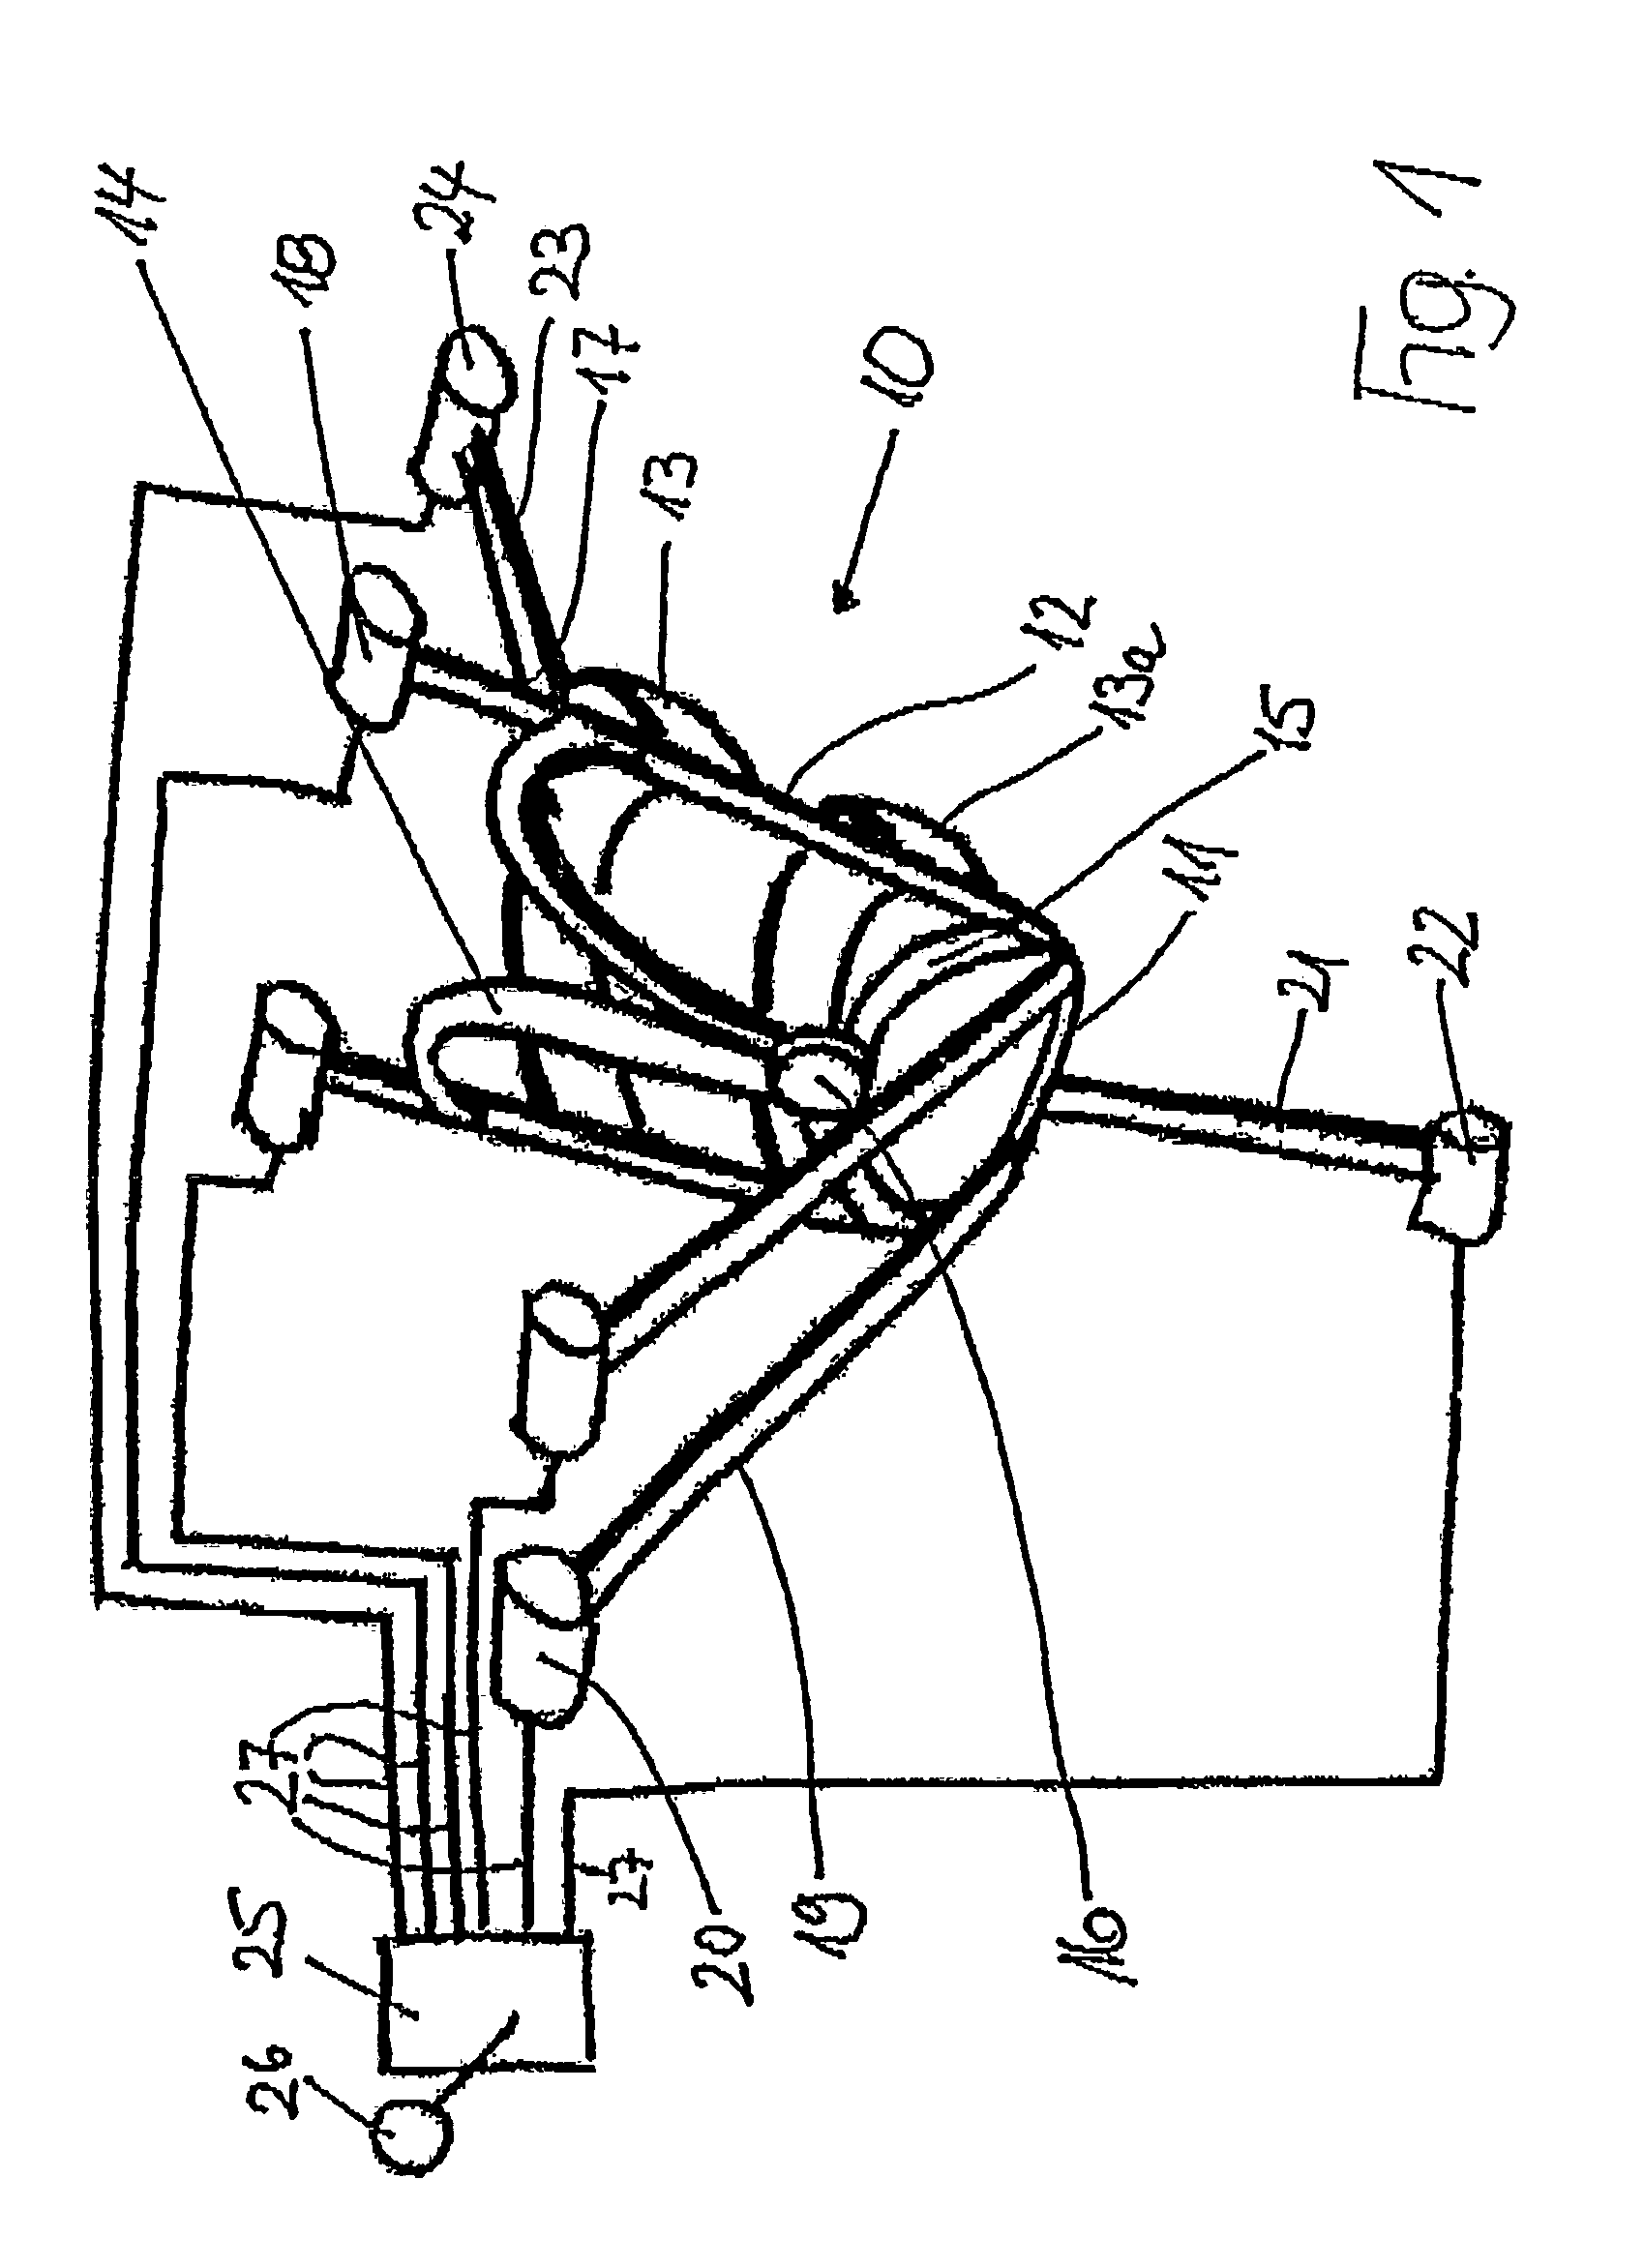 Safety seat, suspended in a land vehicle, aircraft or vessel